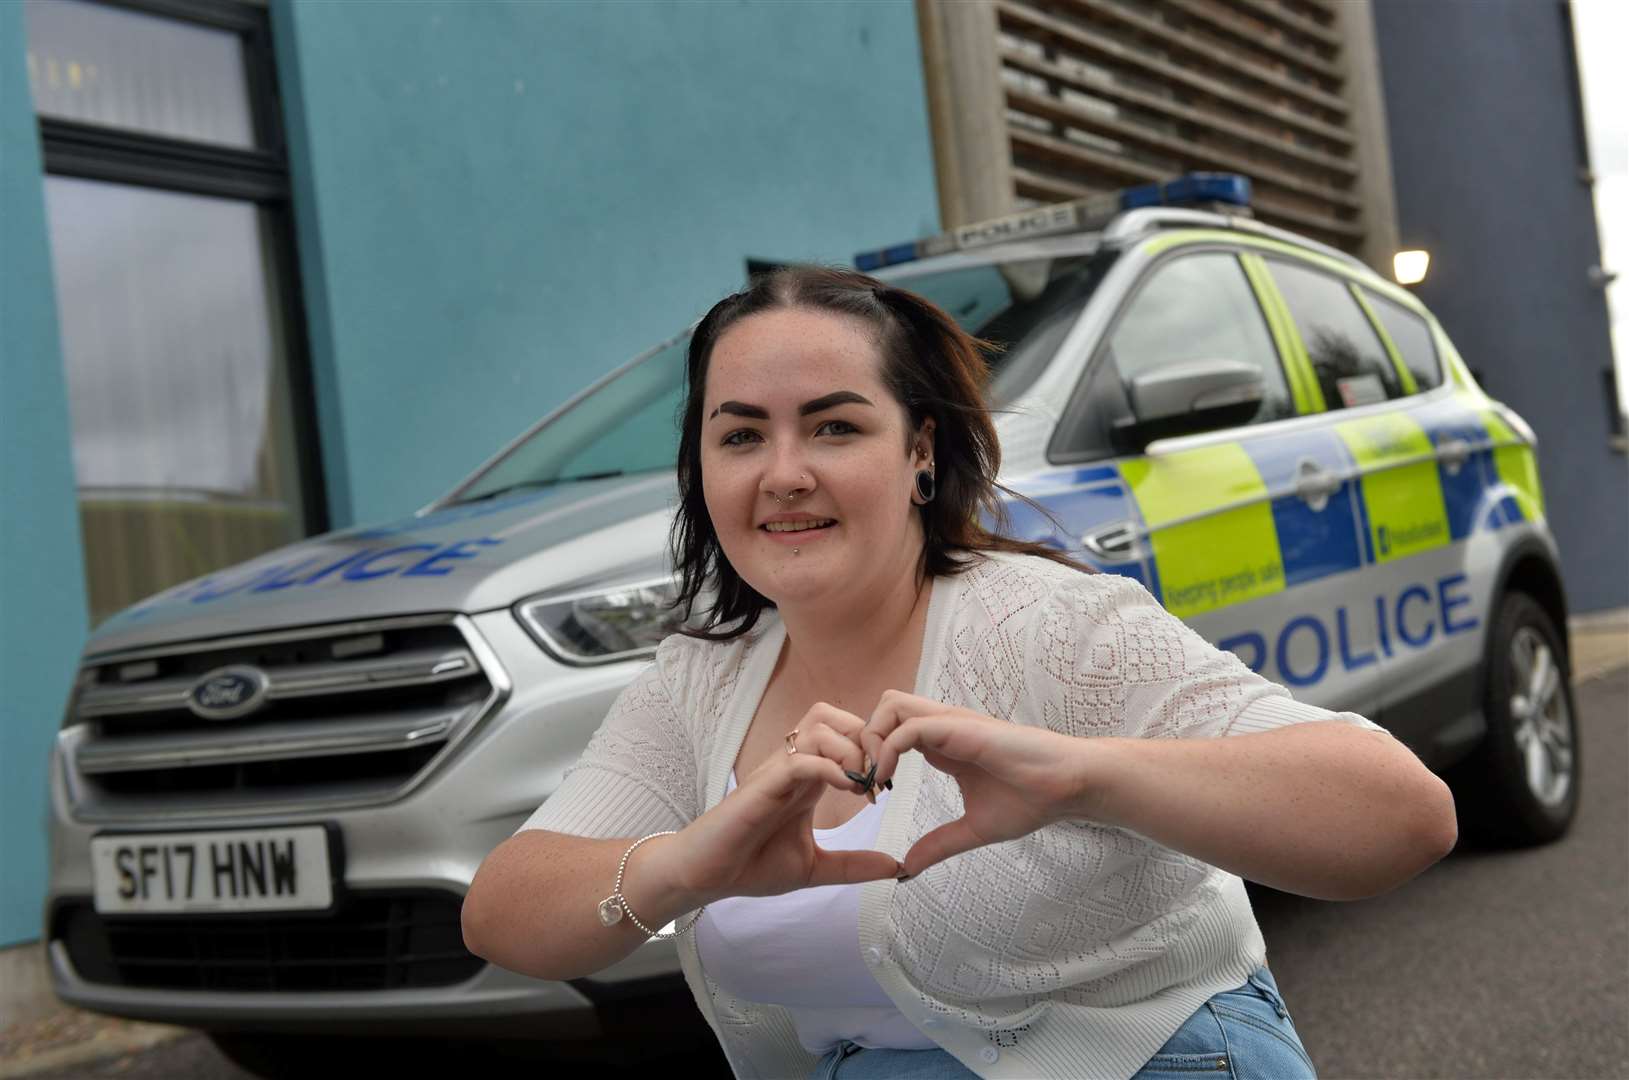 Beth Garrow is keen to get defibrillators for three police cars in Nairn. Picture: Callum Mackay